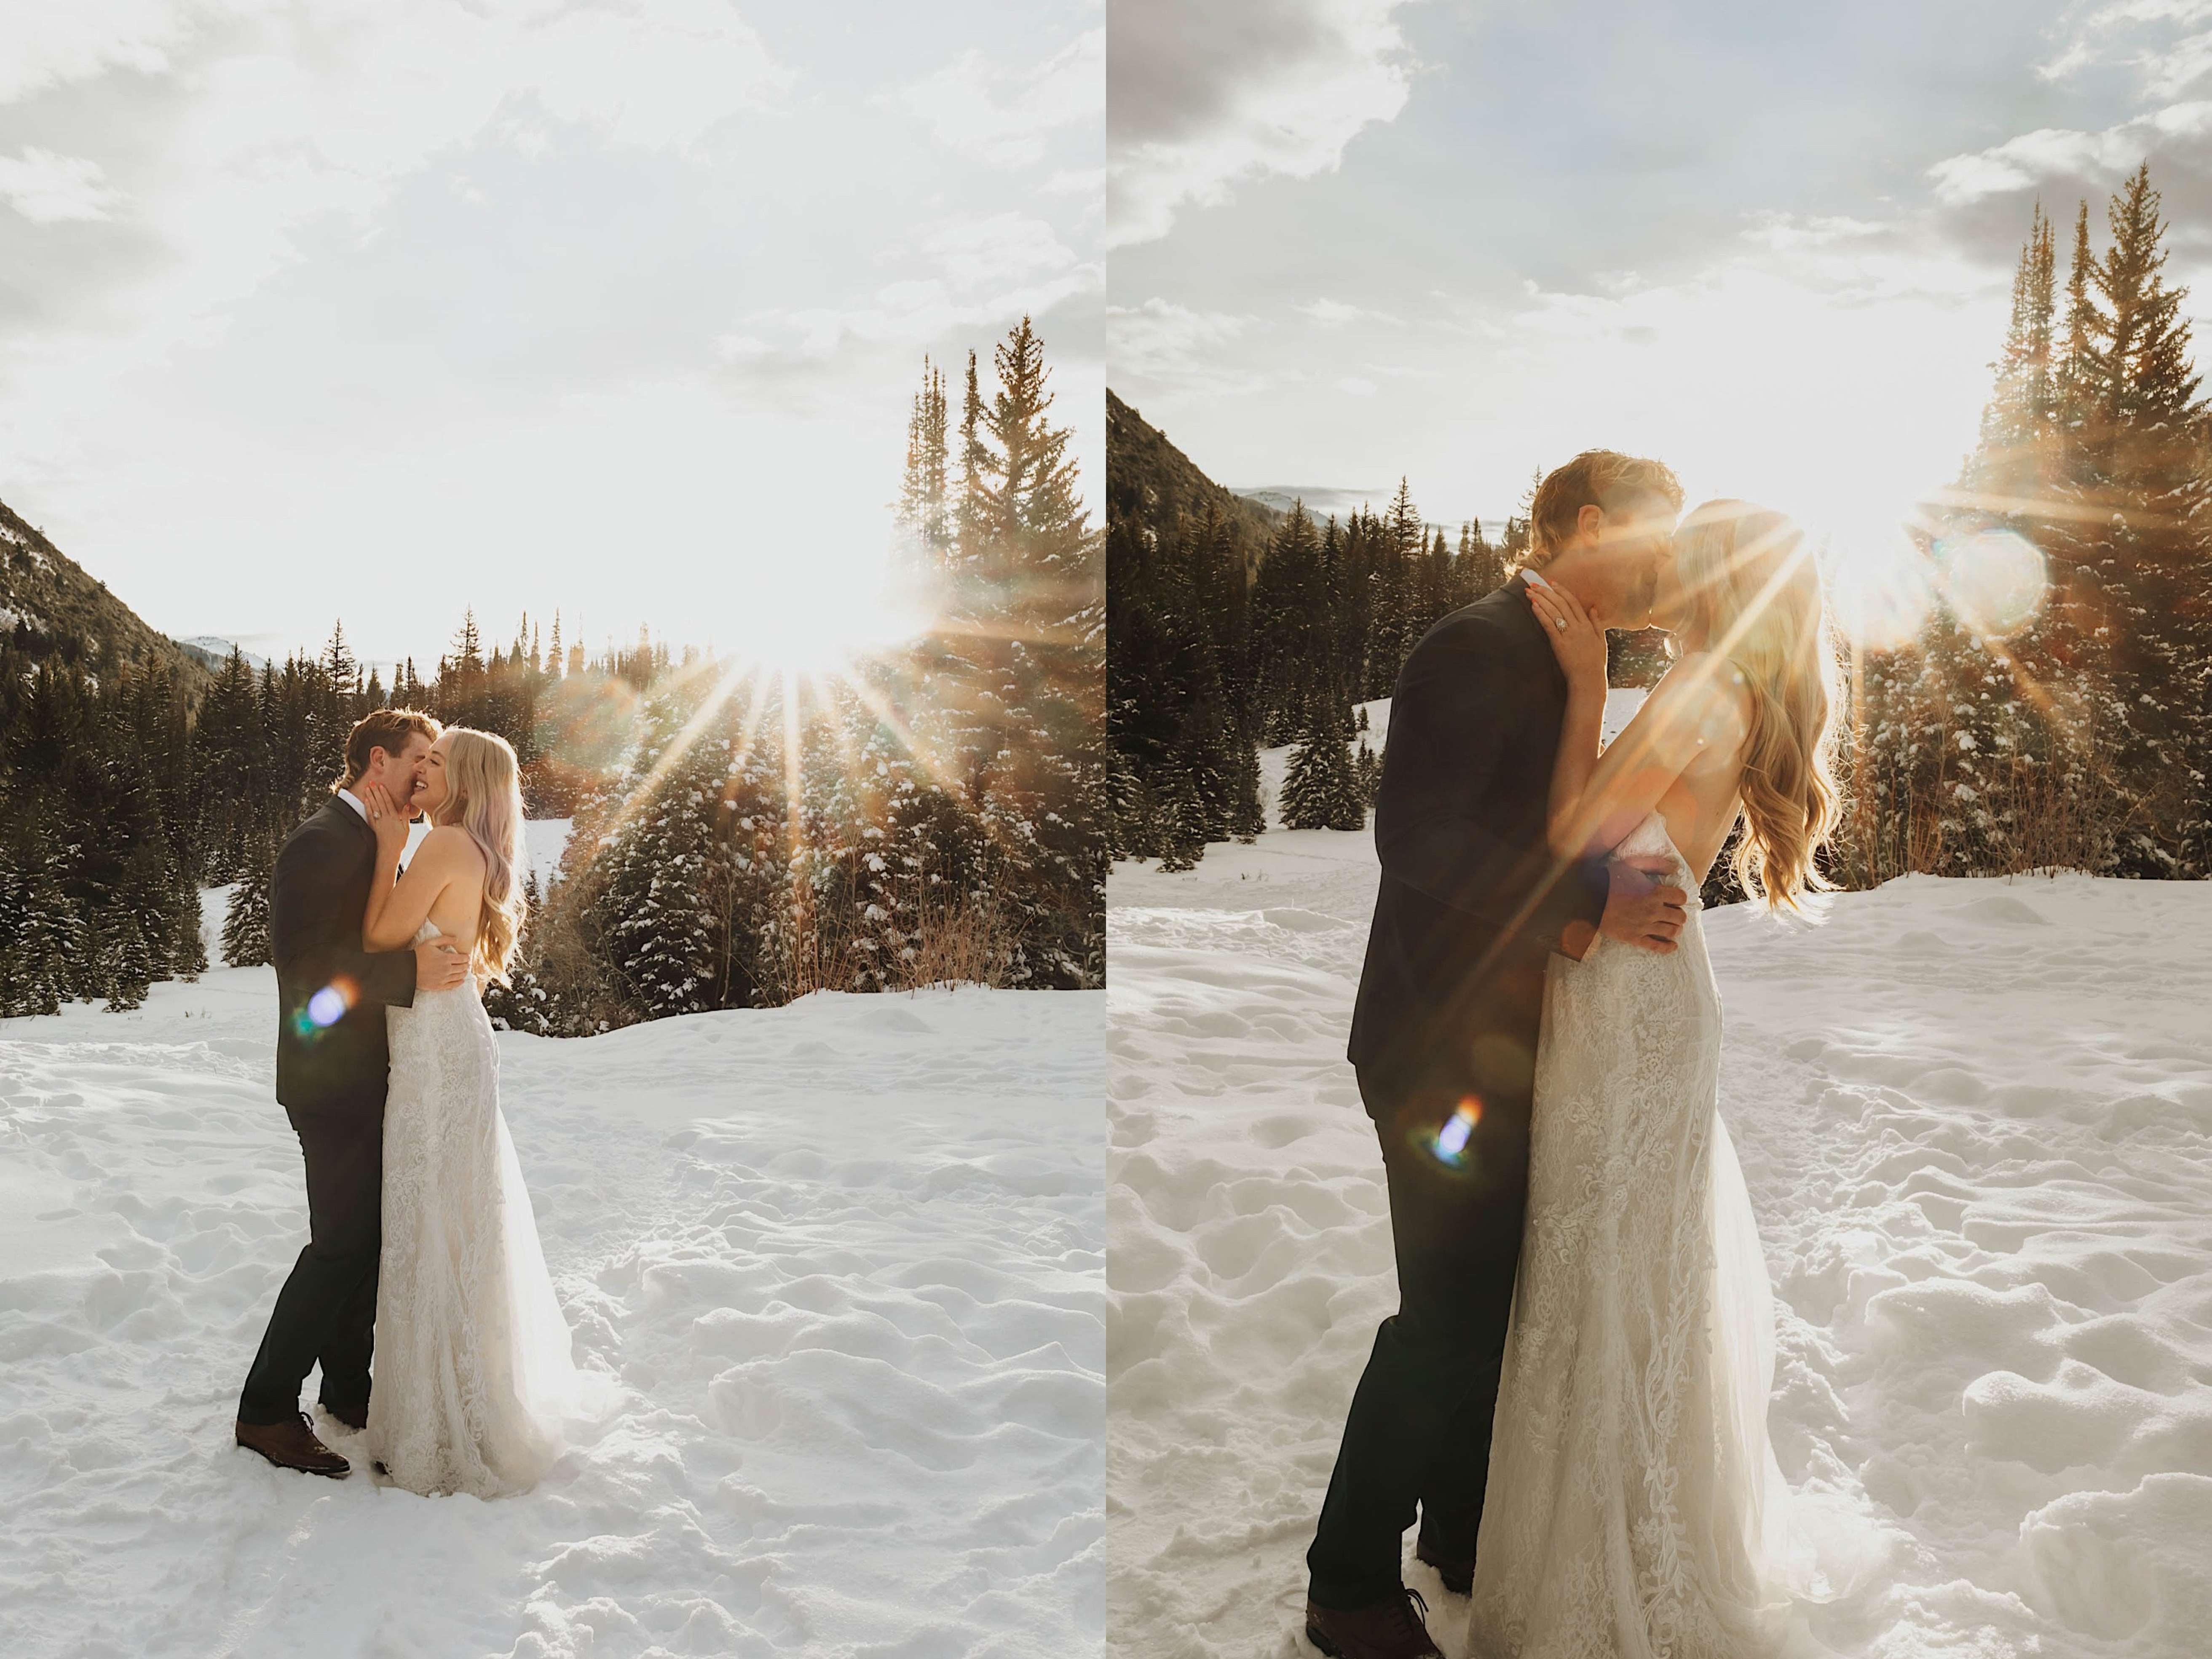 2 photos of a bride and groom kissing one another standing in a snow covered forest while the sun sets behind them